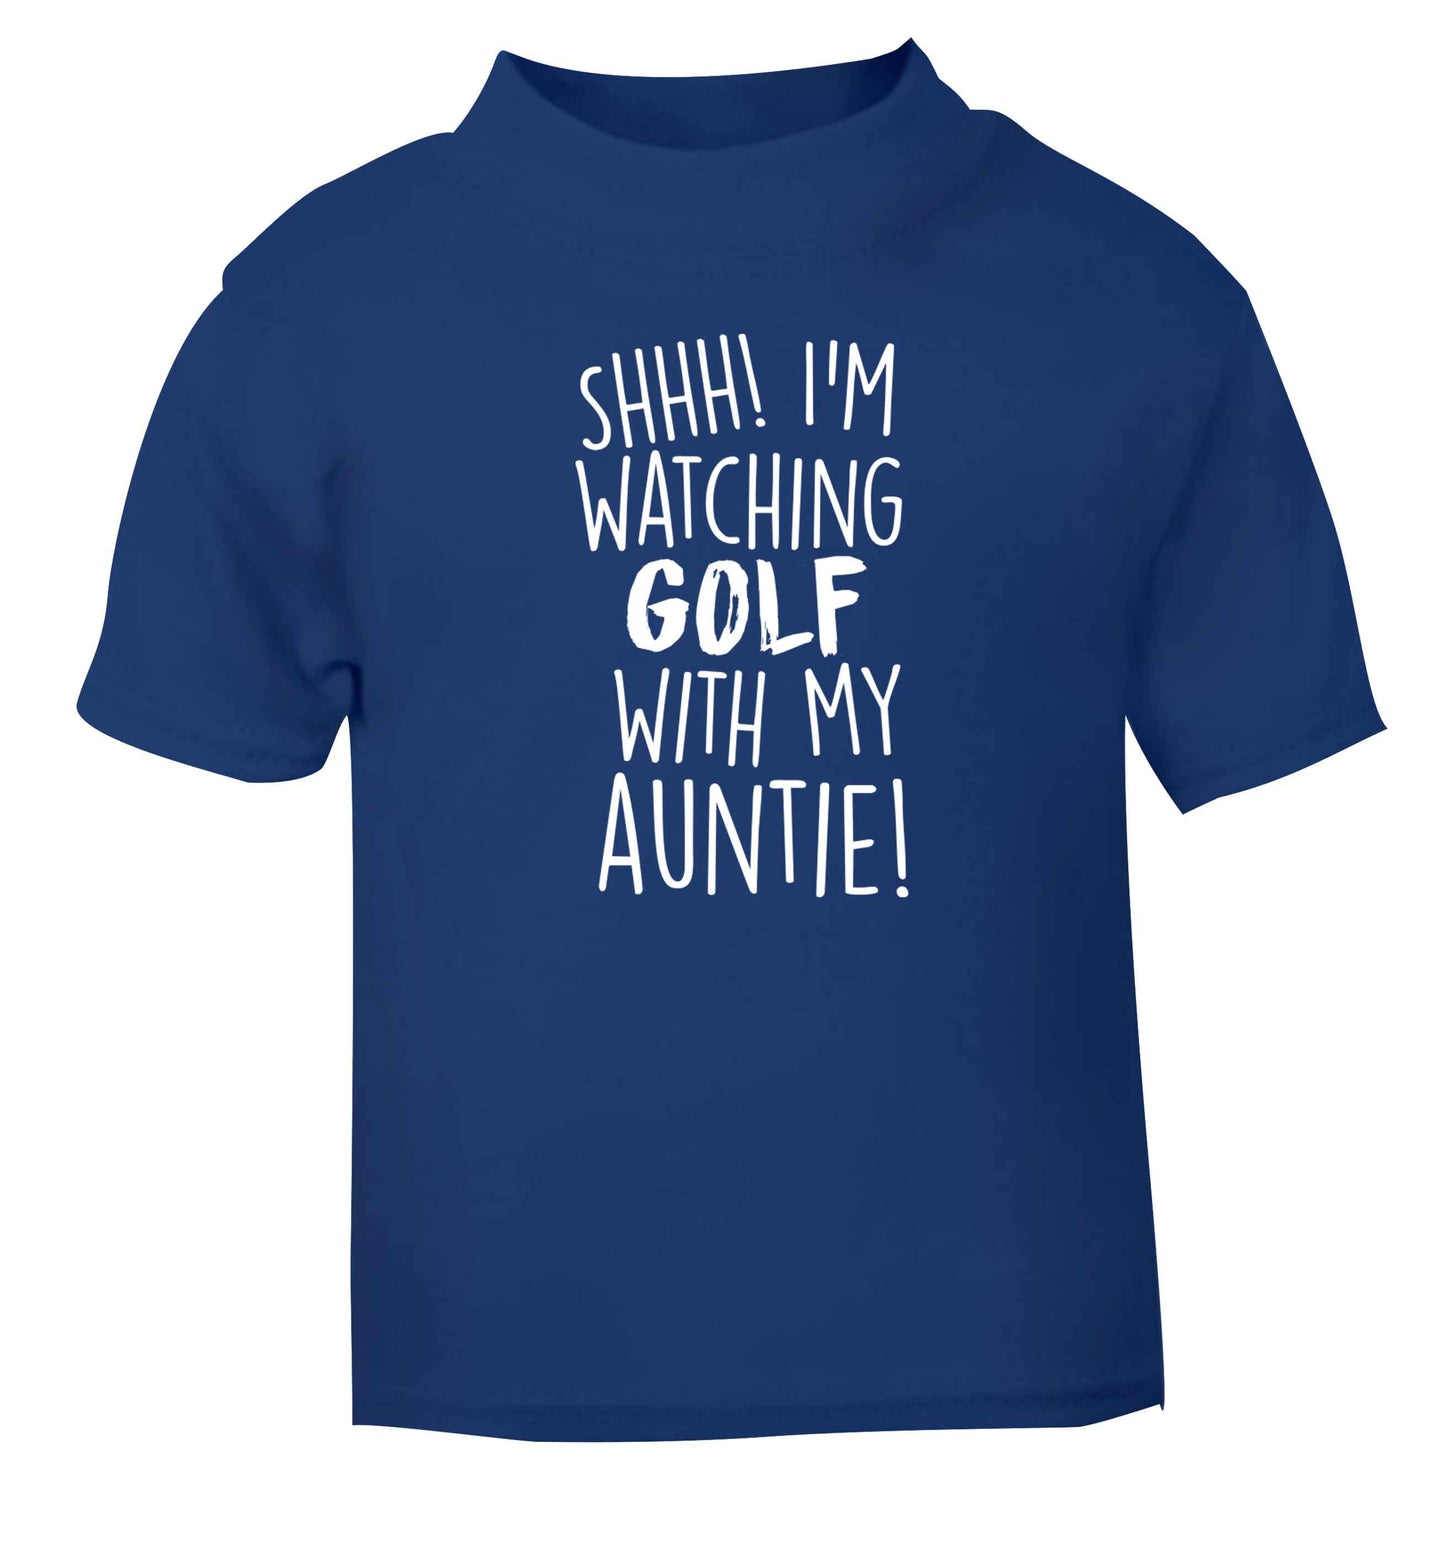 Shh I'm watching golf with my auntie blue Baby Toddler Tshirt 2 Years